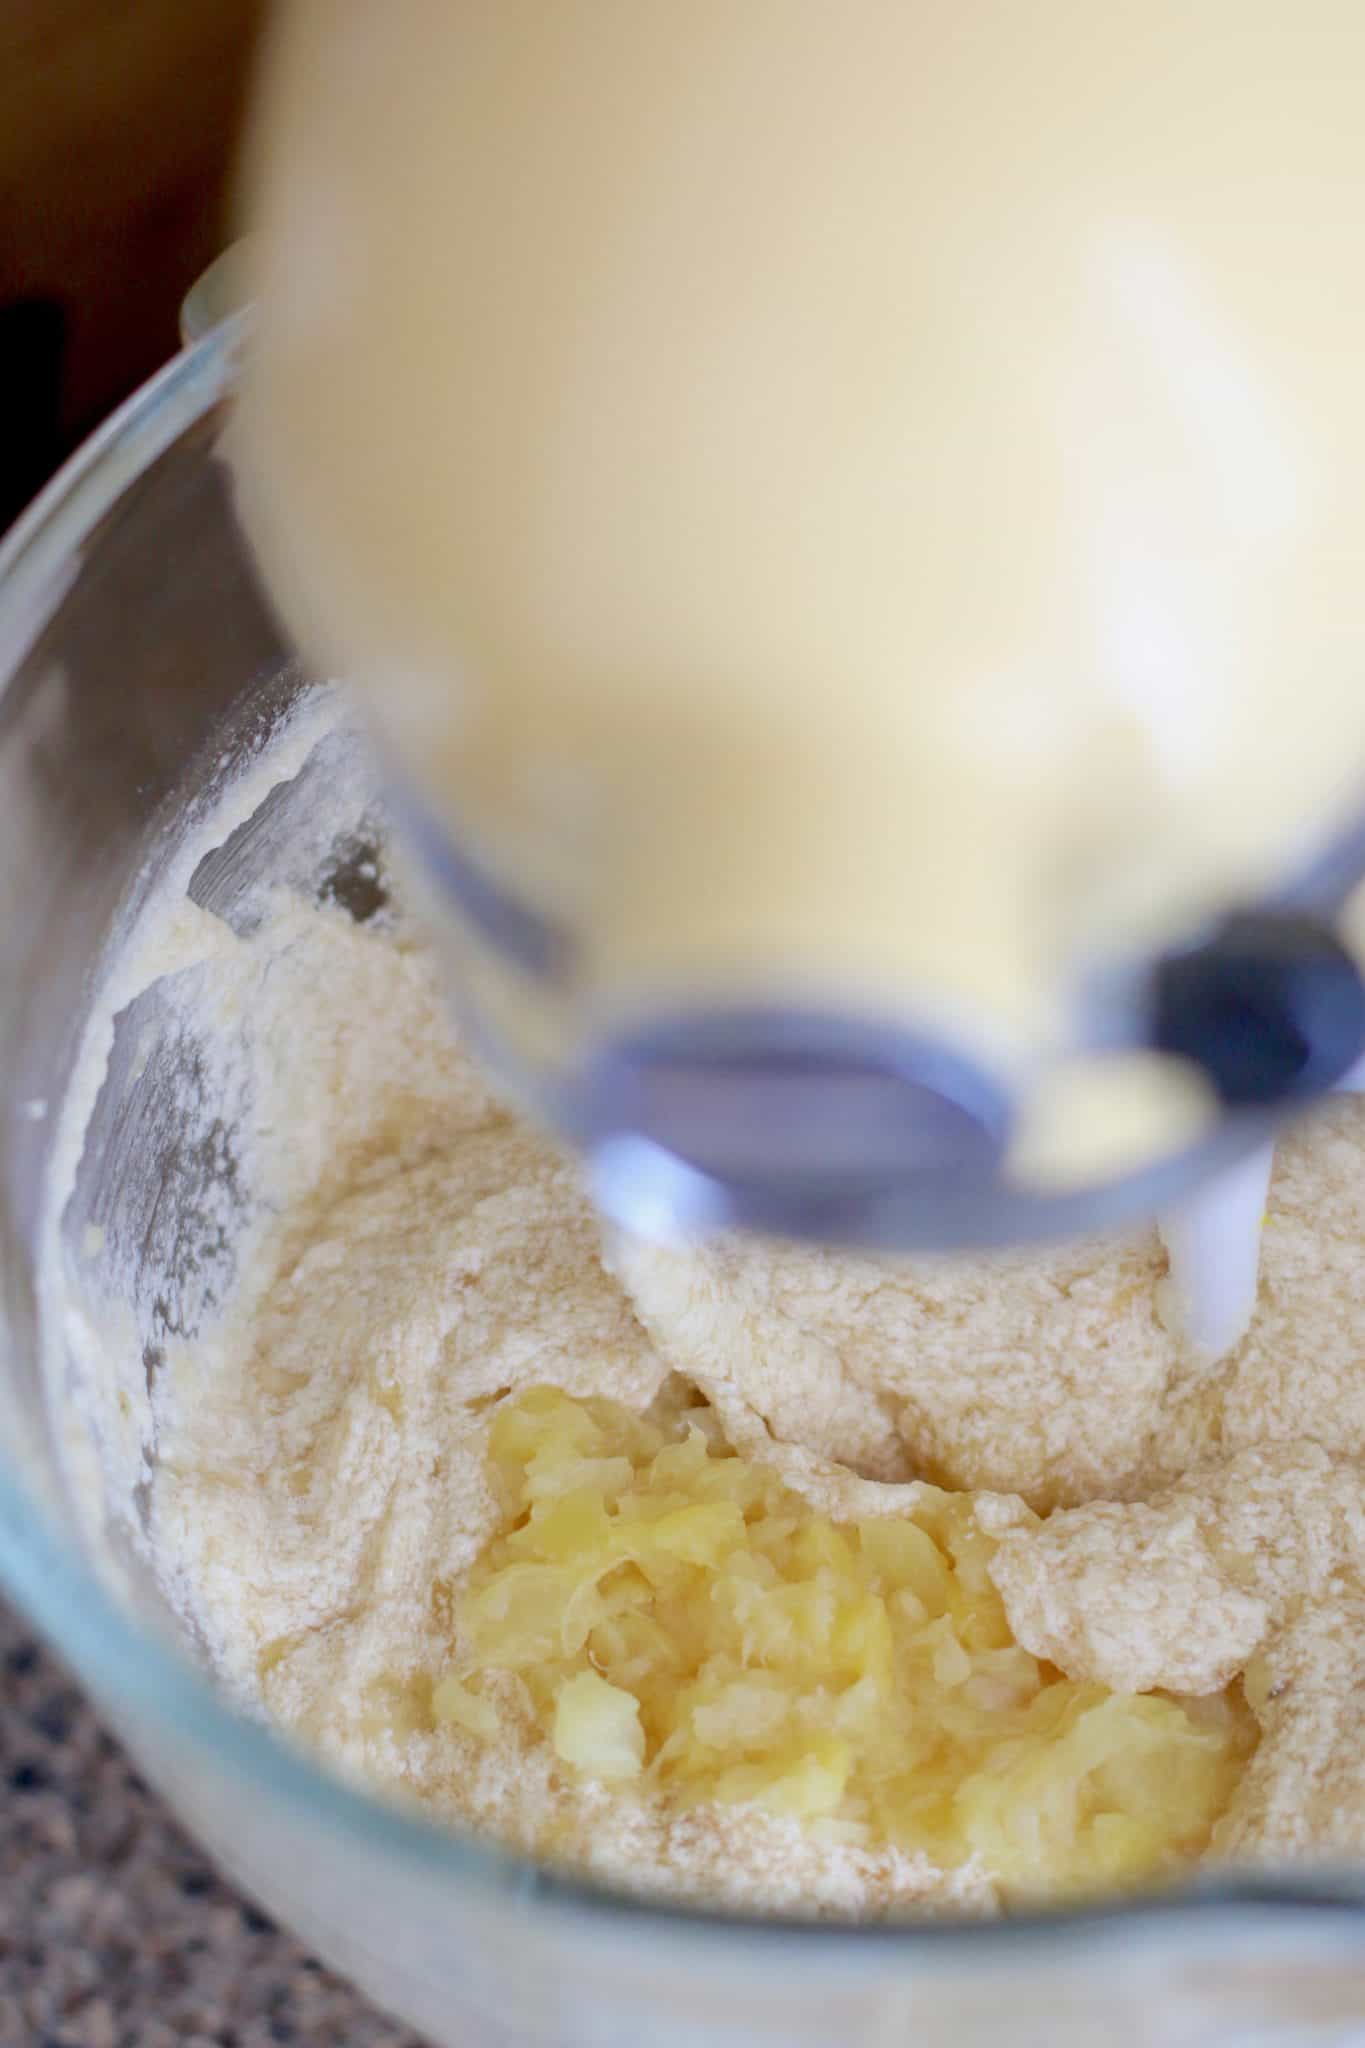 crushed pineapple and bananas added to hummingbird cake batter.